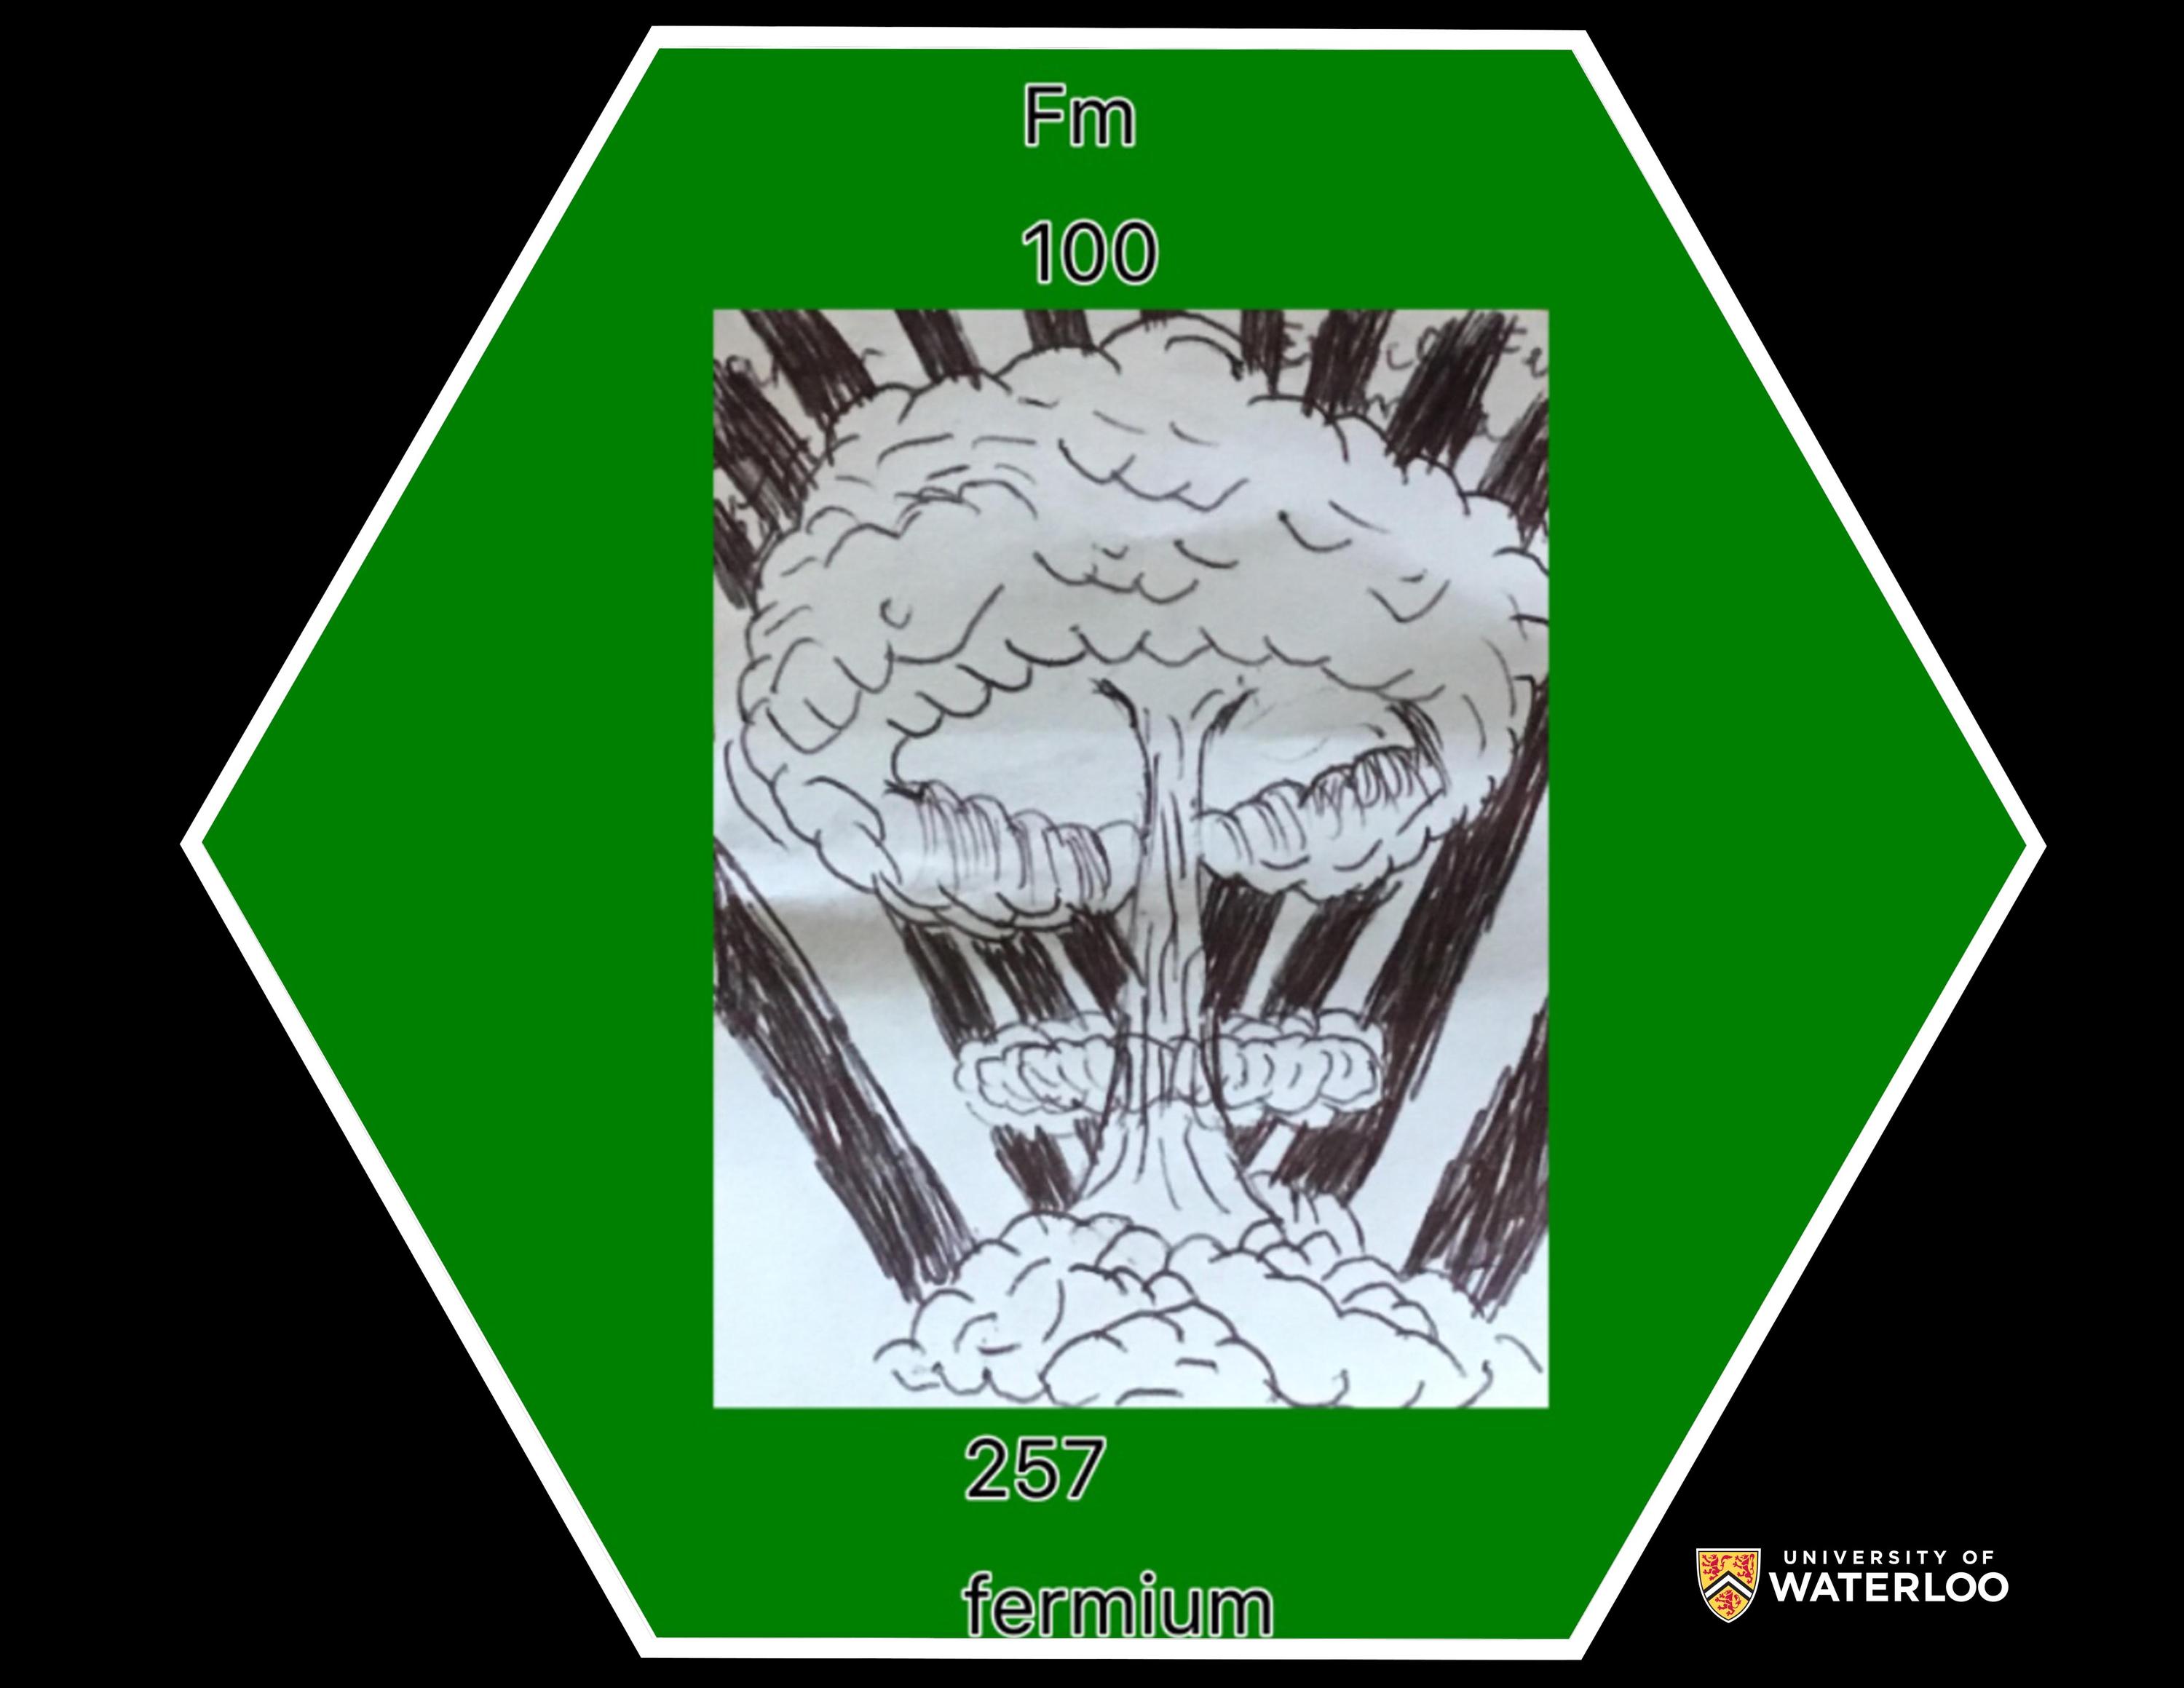 Black and white ink drawing framed on green background. The drawing features a nuclear mushroom cloud. Above the drawing are the chemical symbol “Fm” and atomic number “100”. Below are “257” and “fermium”.